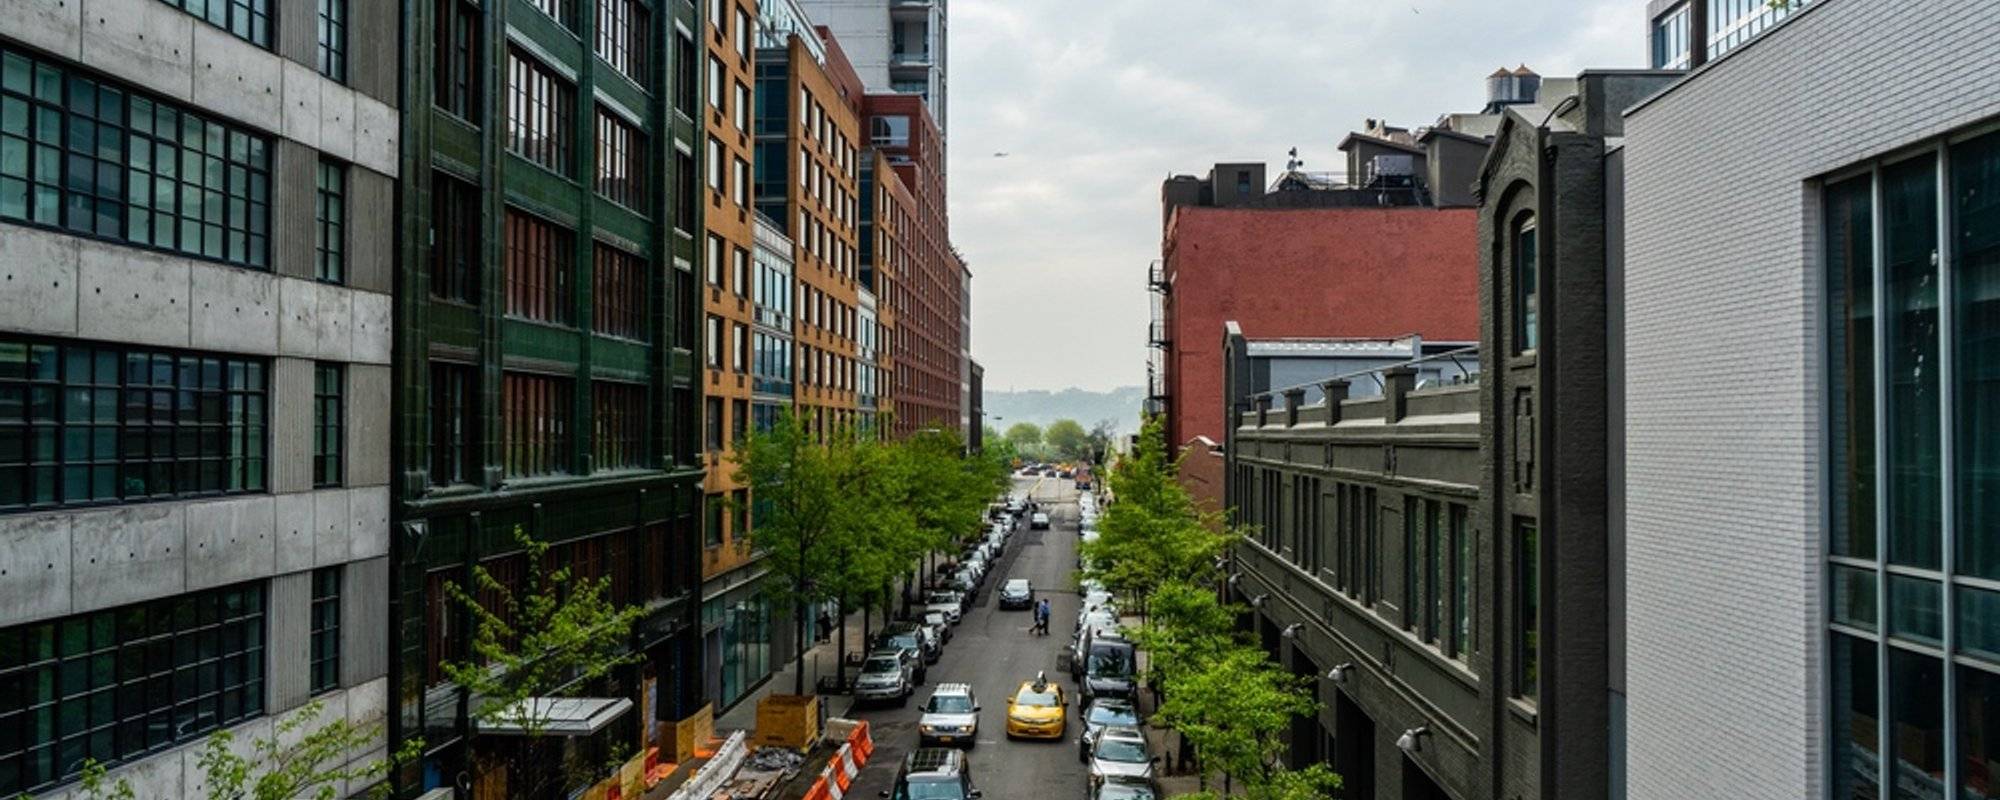 Views from the High Line: NYC History and Street Photography